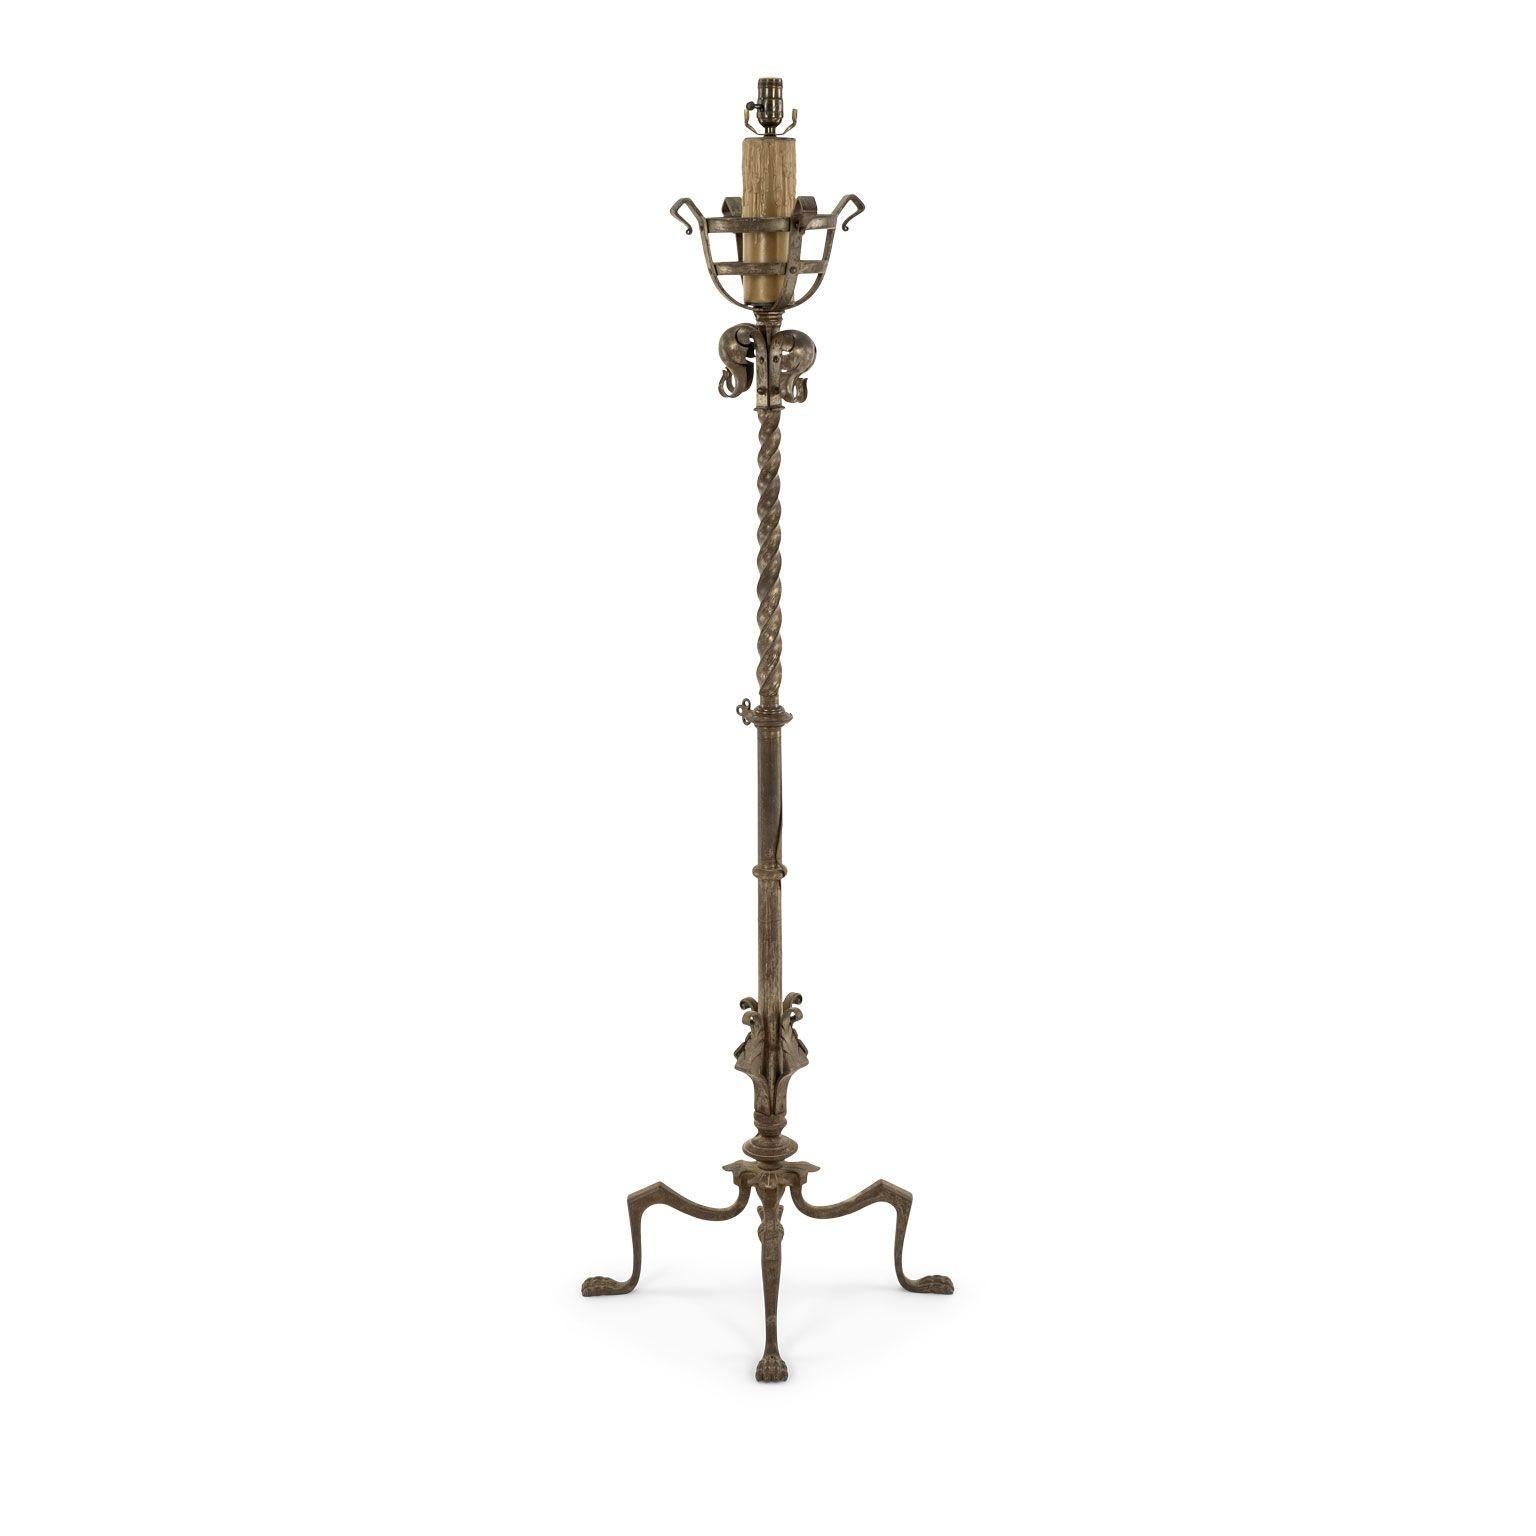 Heavy, fine forged-iron floor lamp created in Spain circa 1900-1940. Four-legged base with paw feet. Wired for use within the USA. Sold without a shade.